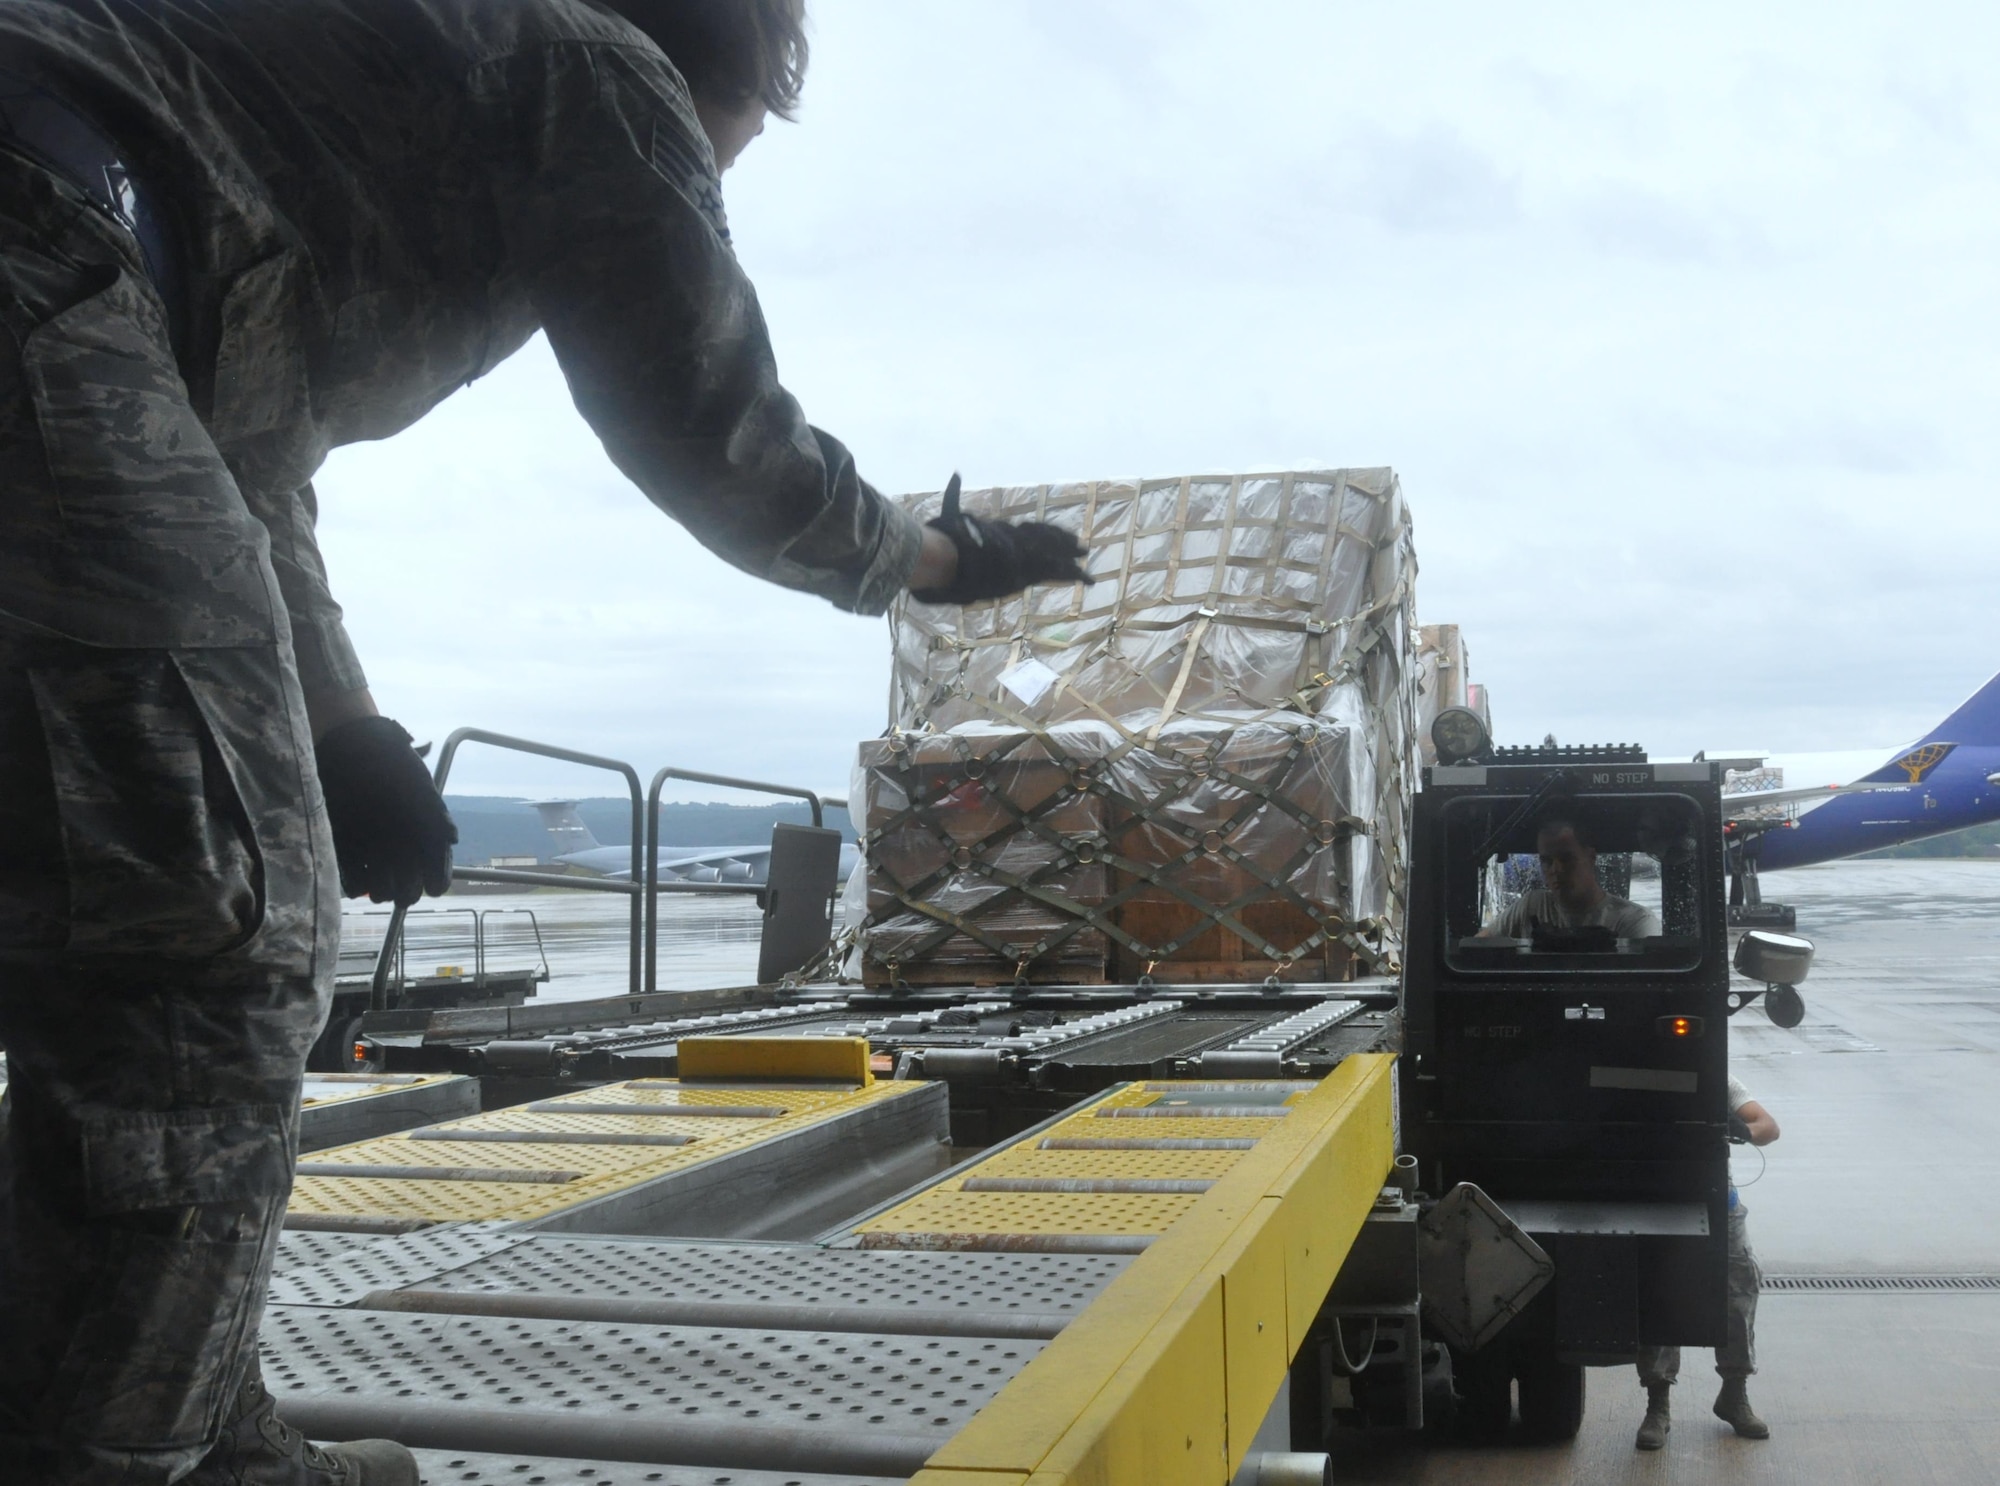 Staff Sgt. Darla Tokarski of the Wisconsin Air National Guard's 128th Logistics Readiness Squadron guides into position the 60K cargo handler driven by Staff Sgt. Tyler Cross, Air Transportation Specialist with the 81st Aerial Port Squadron out of Joint Base Charleston, S.C., at Ramstein AB, Germany, July 12, 2017.  Citizen Airmen of the 128th LRS and 81st APS performed two weeks of annual training at Ramstein in order to maintain readiness and familiarization with high-volume aerial port operations.  (U.S. Air Force photo by 1st Lt. Justin Clark)